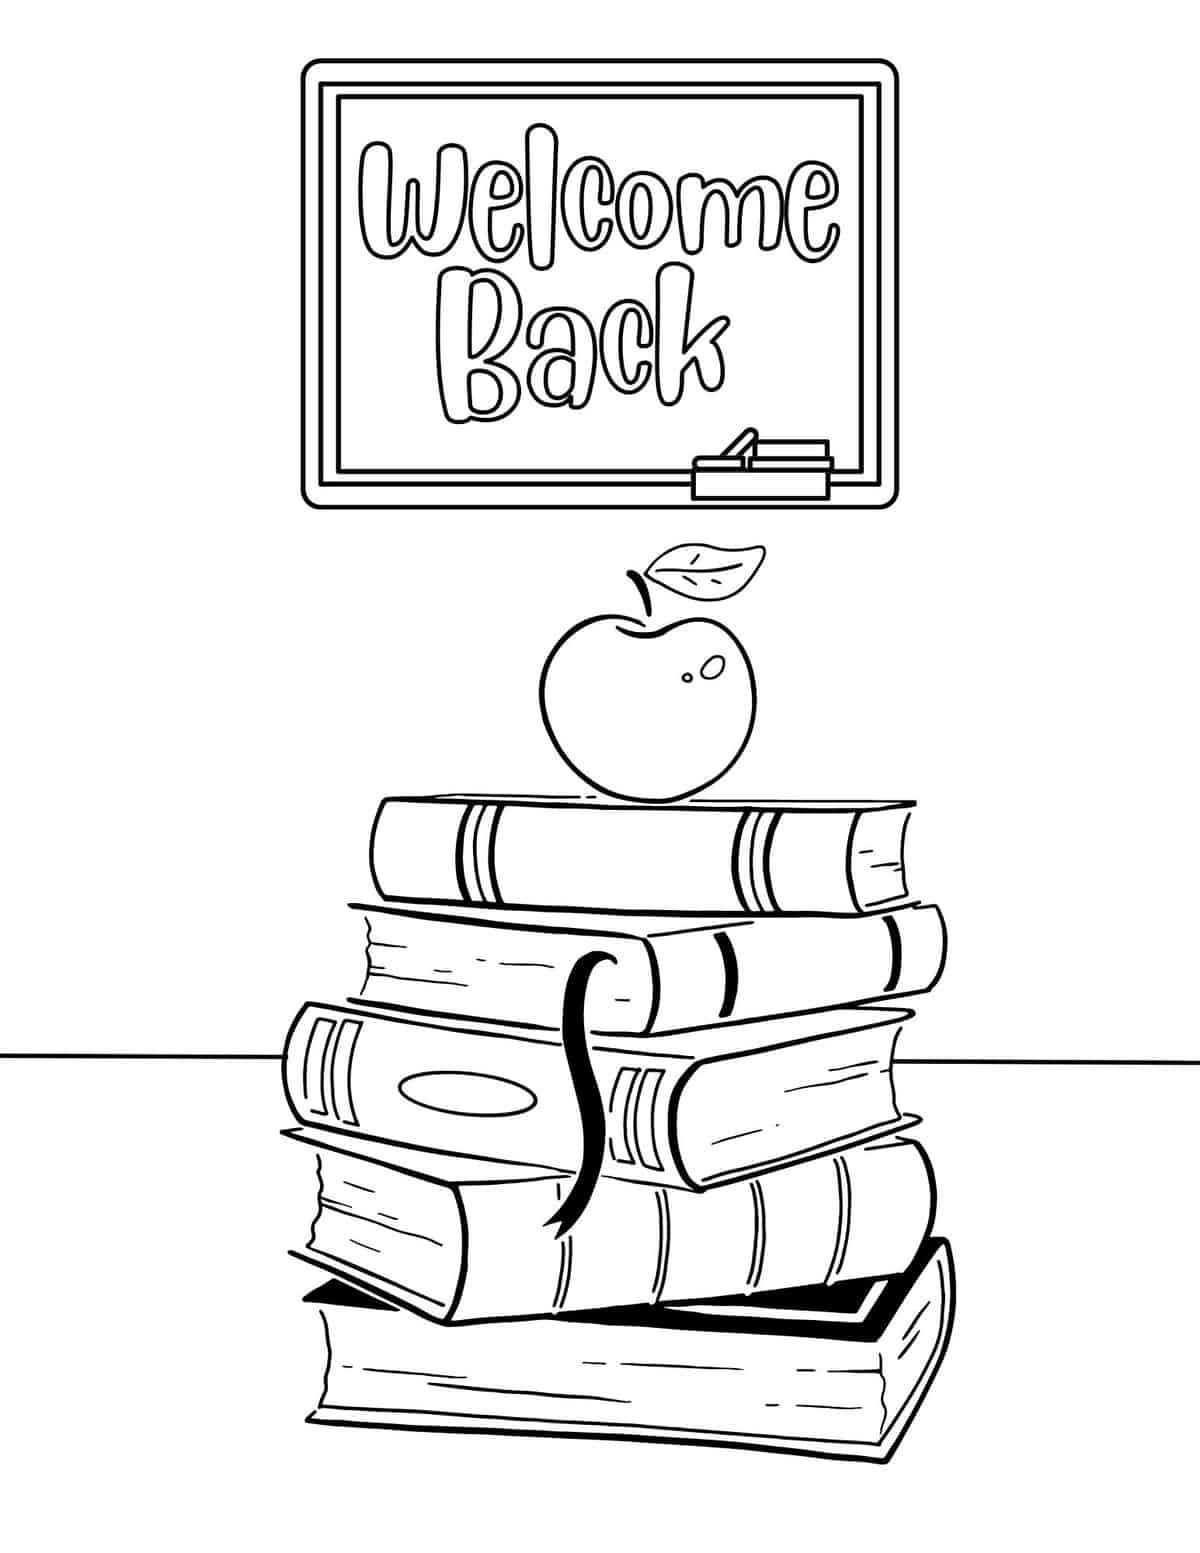 welcome back to school coloring page with a stack of books and an apple